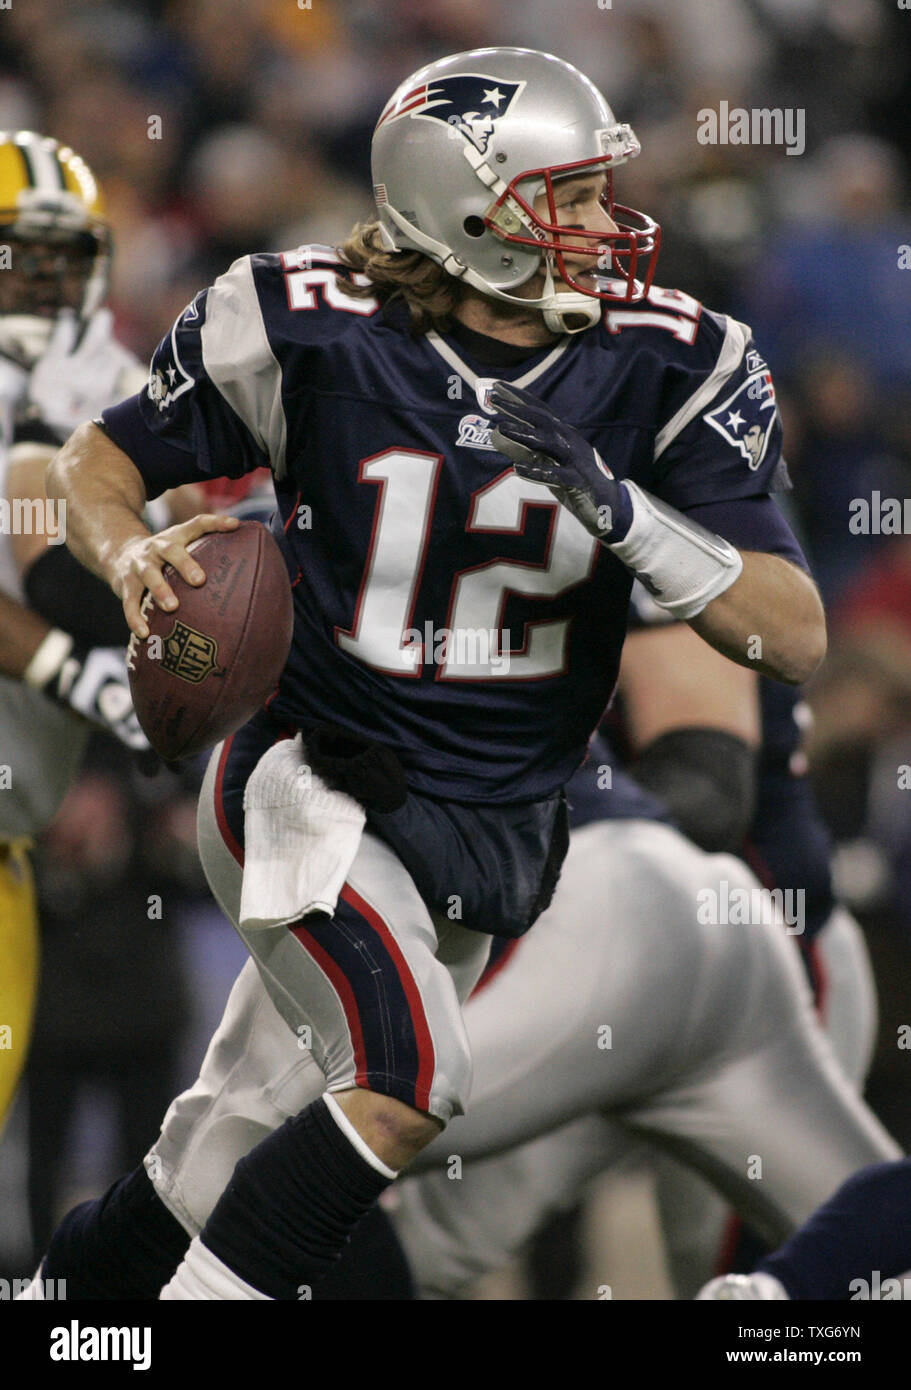 New England Patriots quarterback Tom Brady scrambles out of the pocket in the second quarter against the Green Bay Packers at Gillette Stadium in Foxboro, Massachusetts on December 19, 2010.    UPI/Matthew Healey Stock Photo